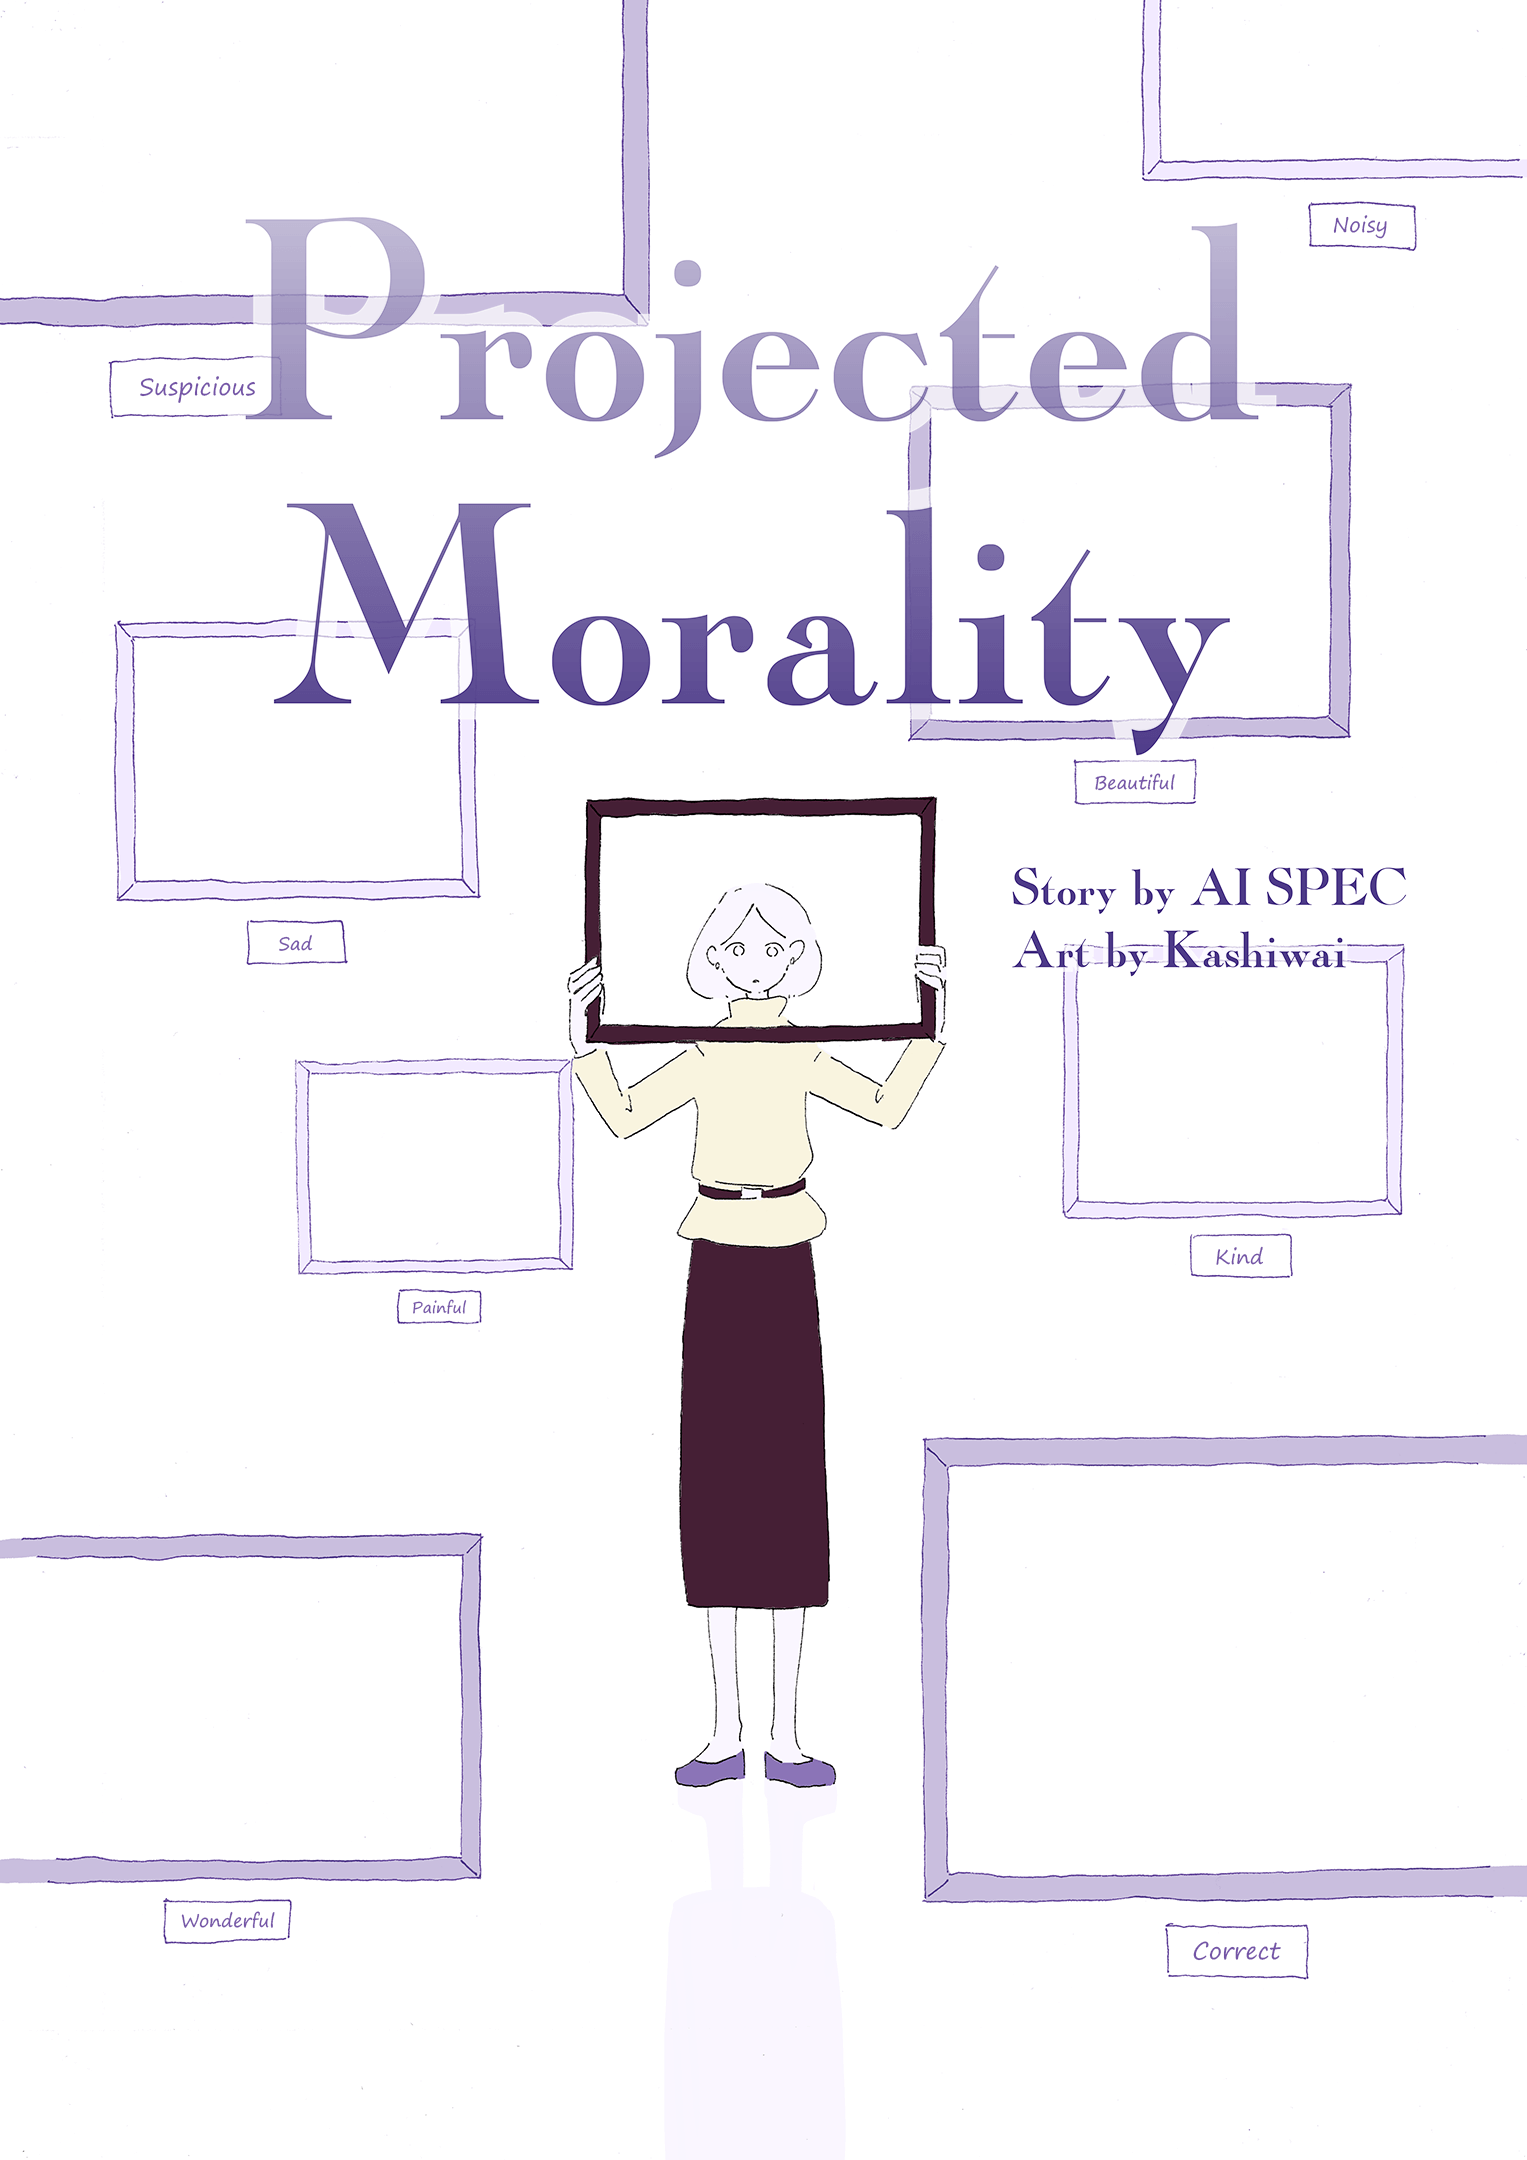 AI SPEC - Projected Morality